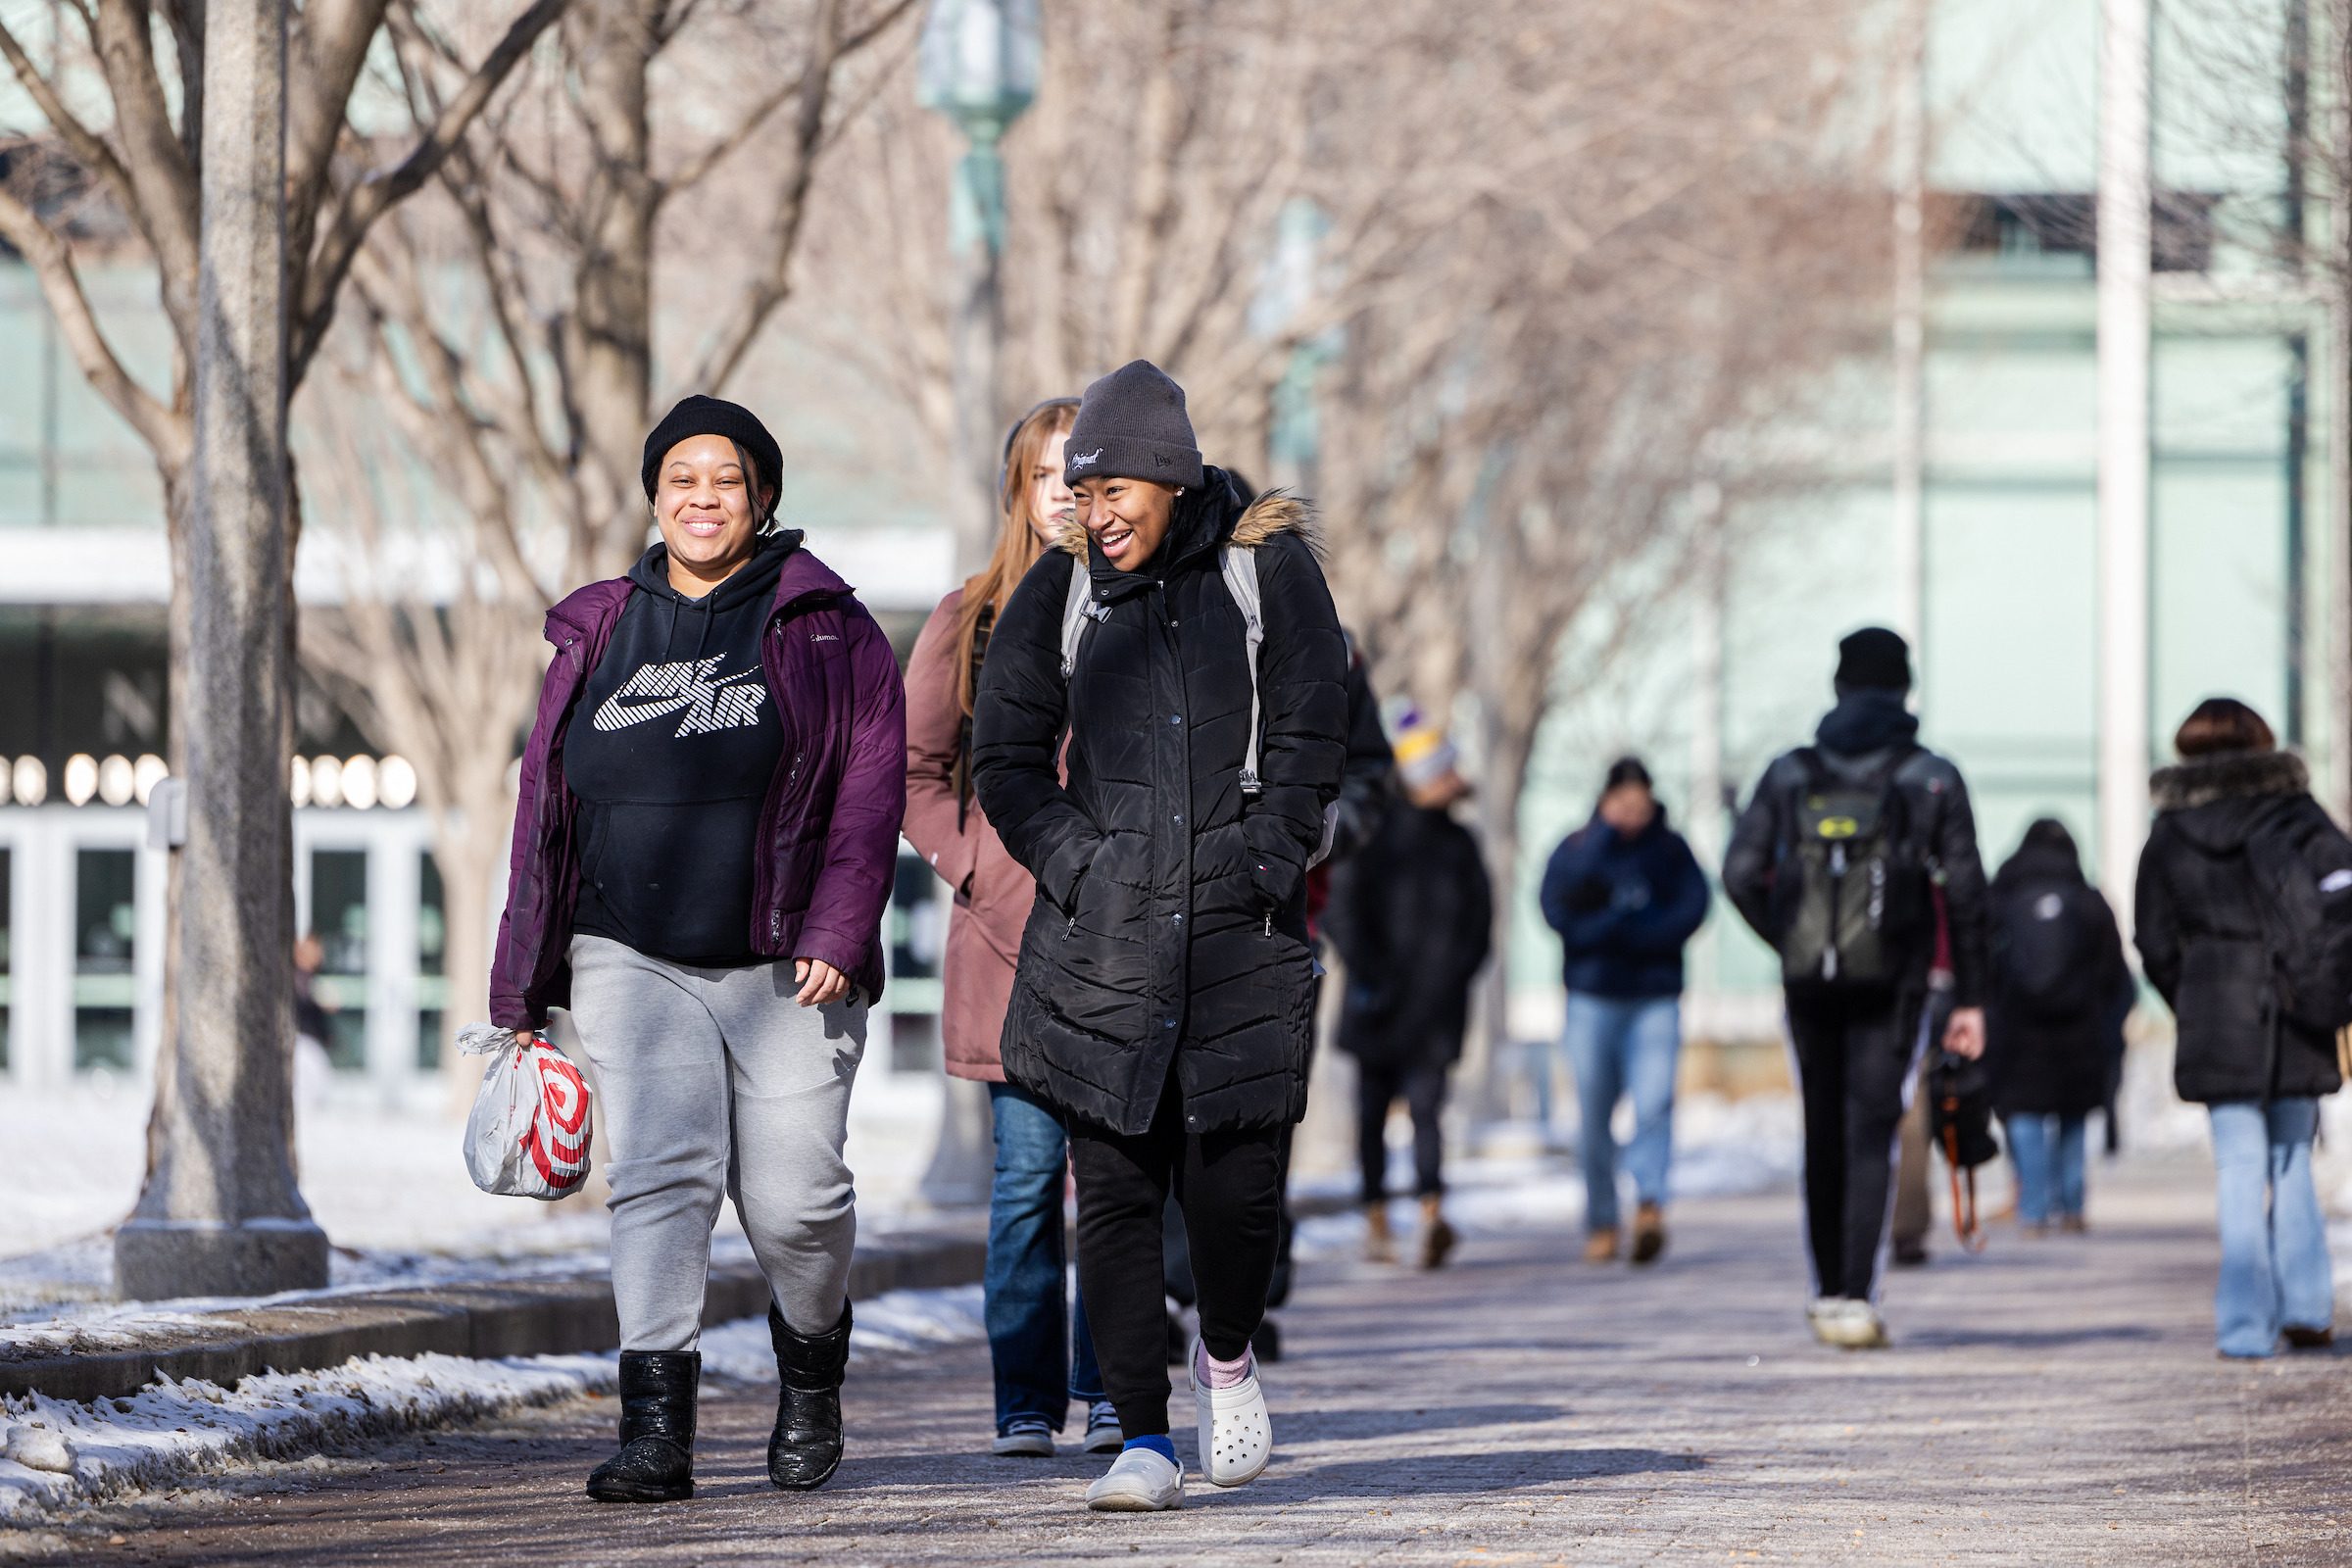 Winter scenes from Loyola's Lake Shore Campus during the first week of classes on the 2024 spring semester. (Photo by: Lukas Keapproth)